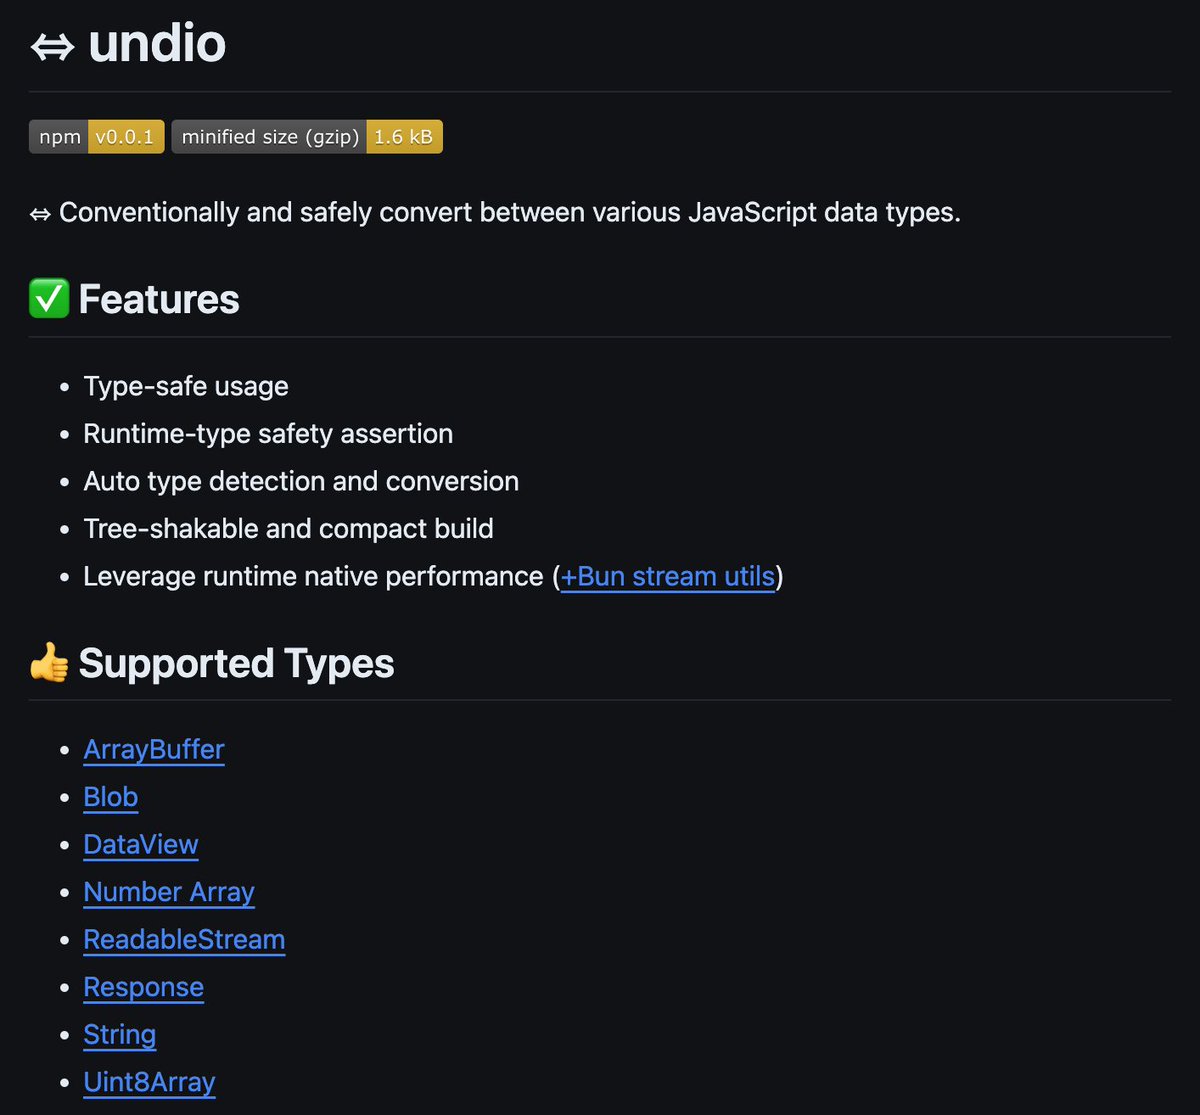 Today, I was on a project needing support for various binary data types with runtime safety and cross-runtime portability. Made a new toy I'll likely use in several packages in the future! 🤞 undio.unjs.io